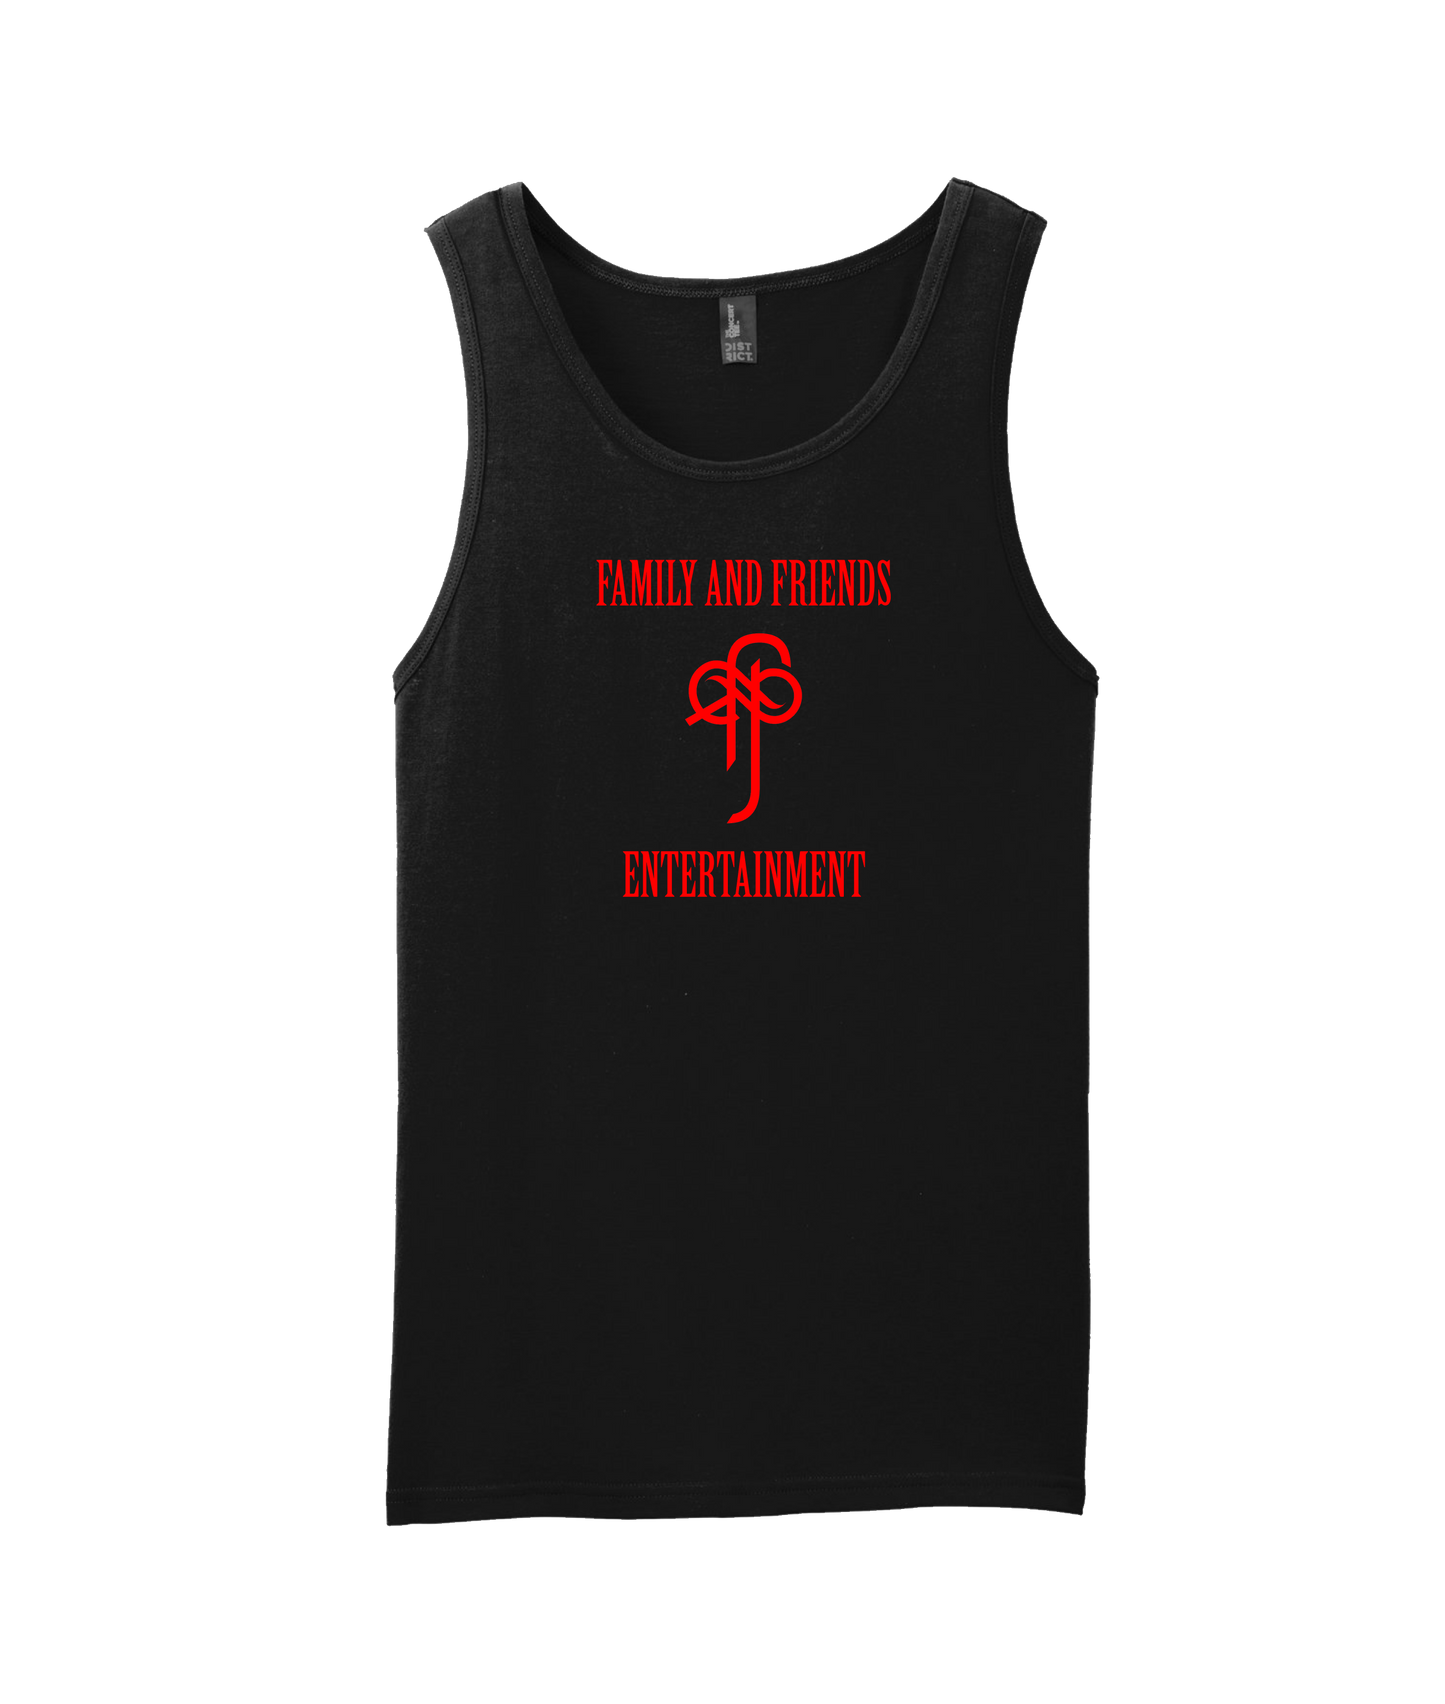 Sin Crawford - Family and Friends Ent. - Black Tank Top